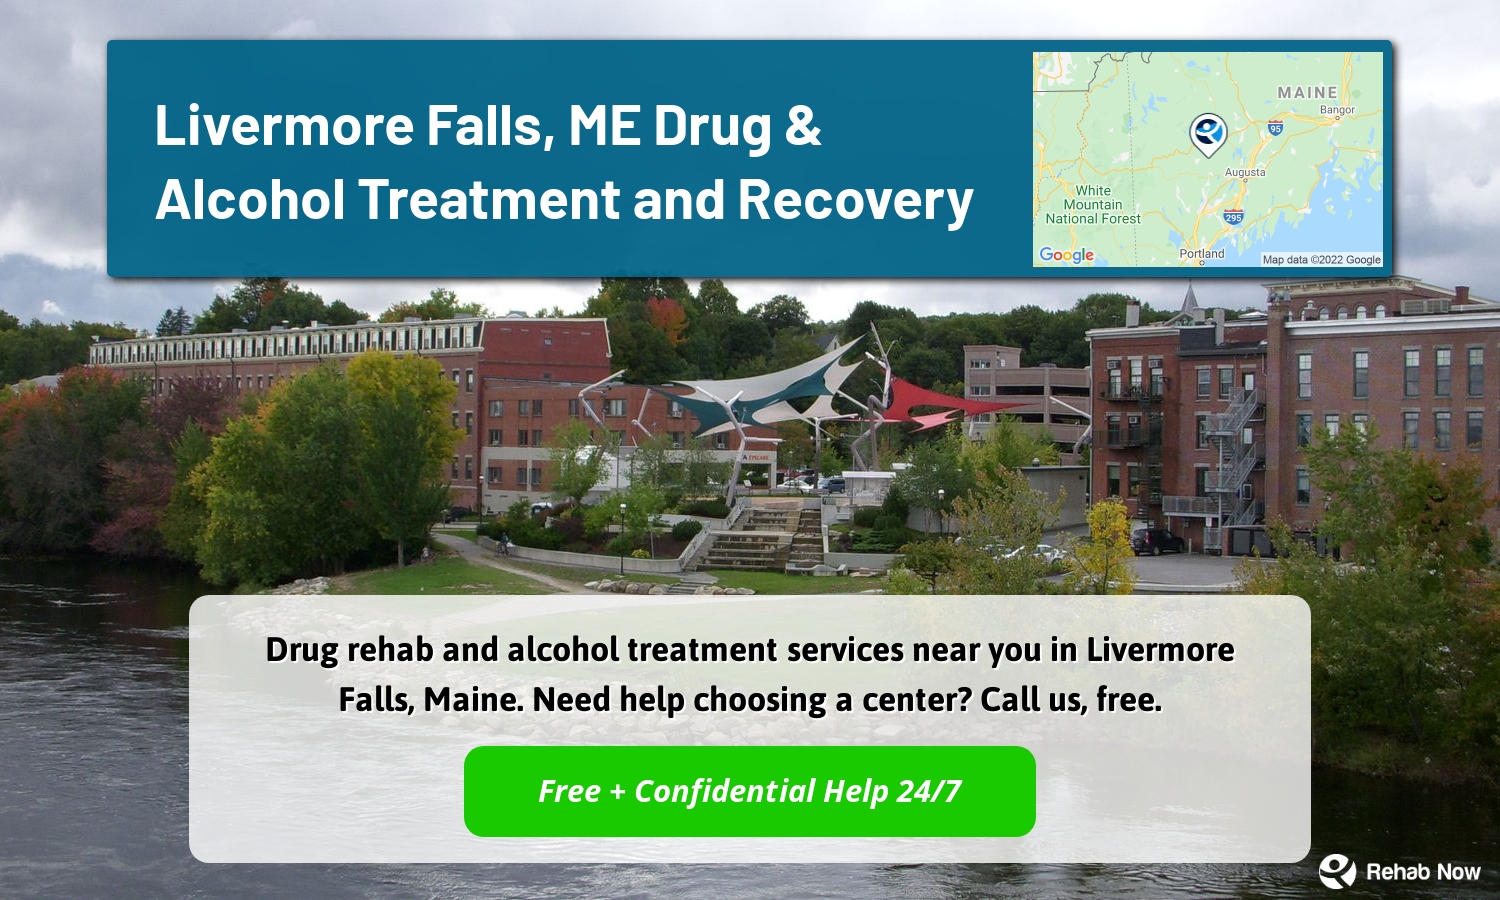 Drug rehab and alcohol treatment services near you in Livermore Falls, Maine. Need help choosing a center? Call us, free.